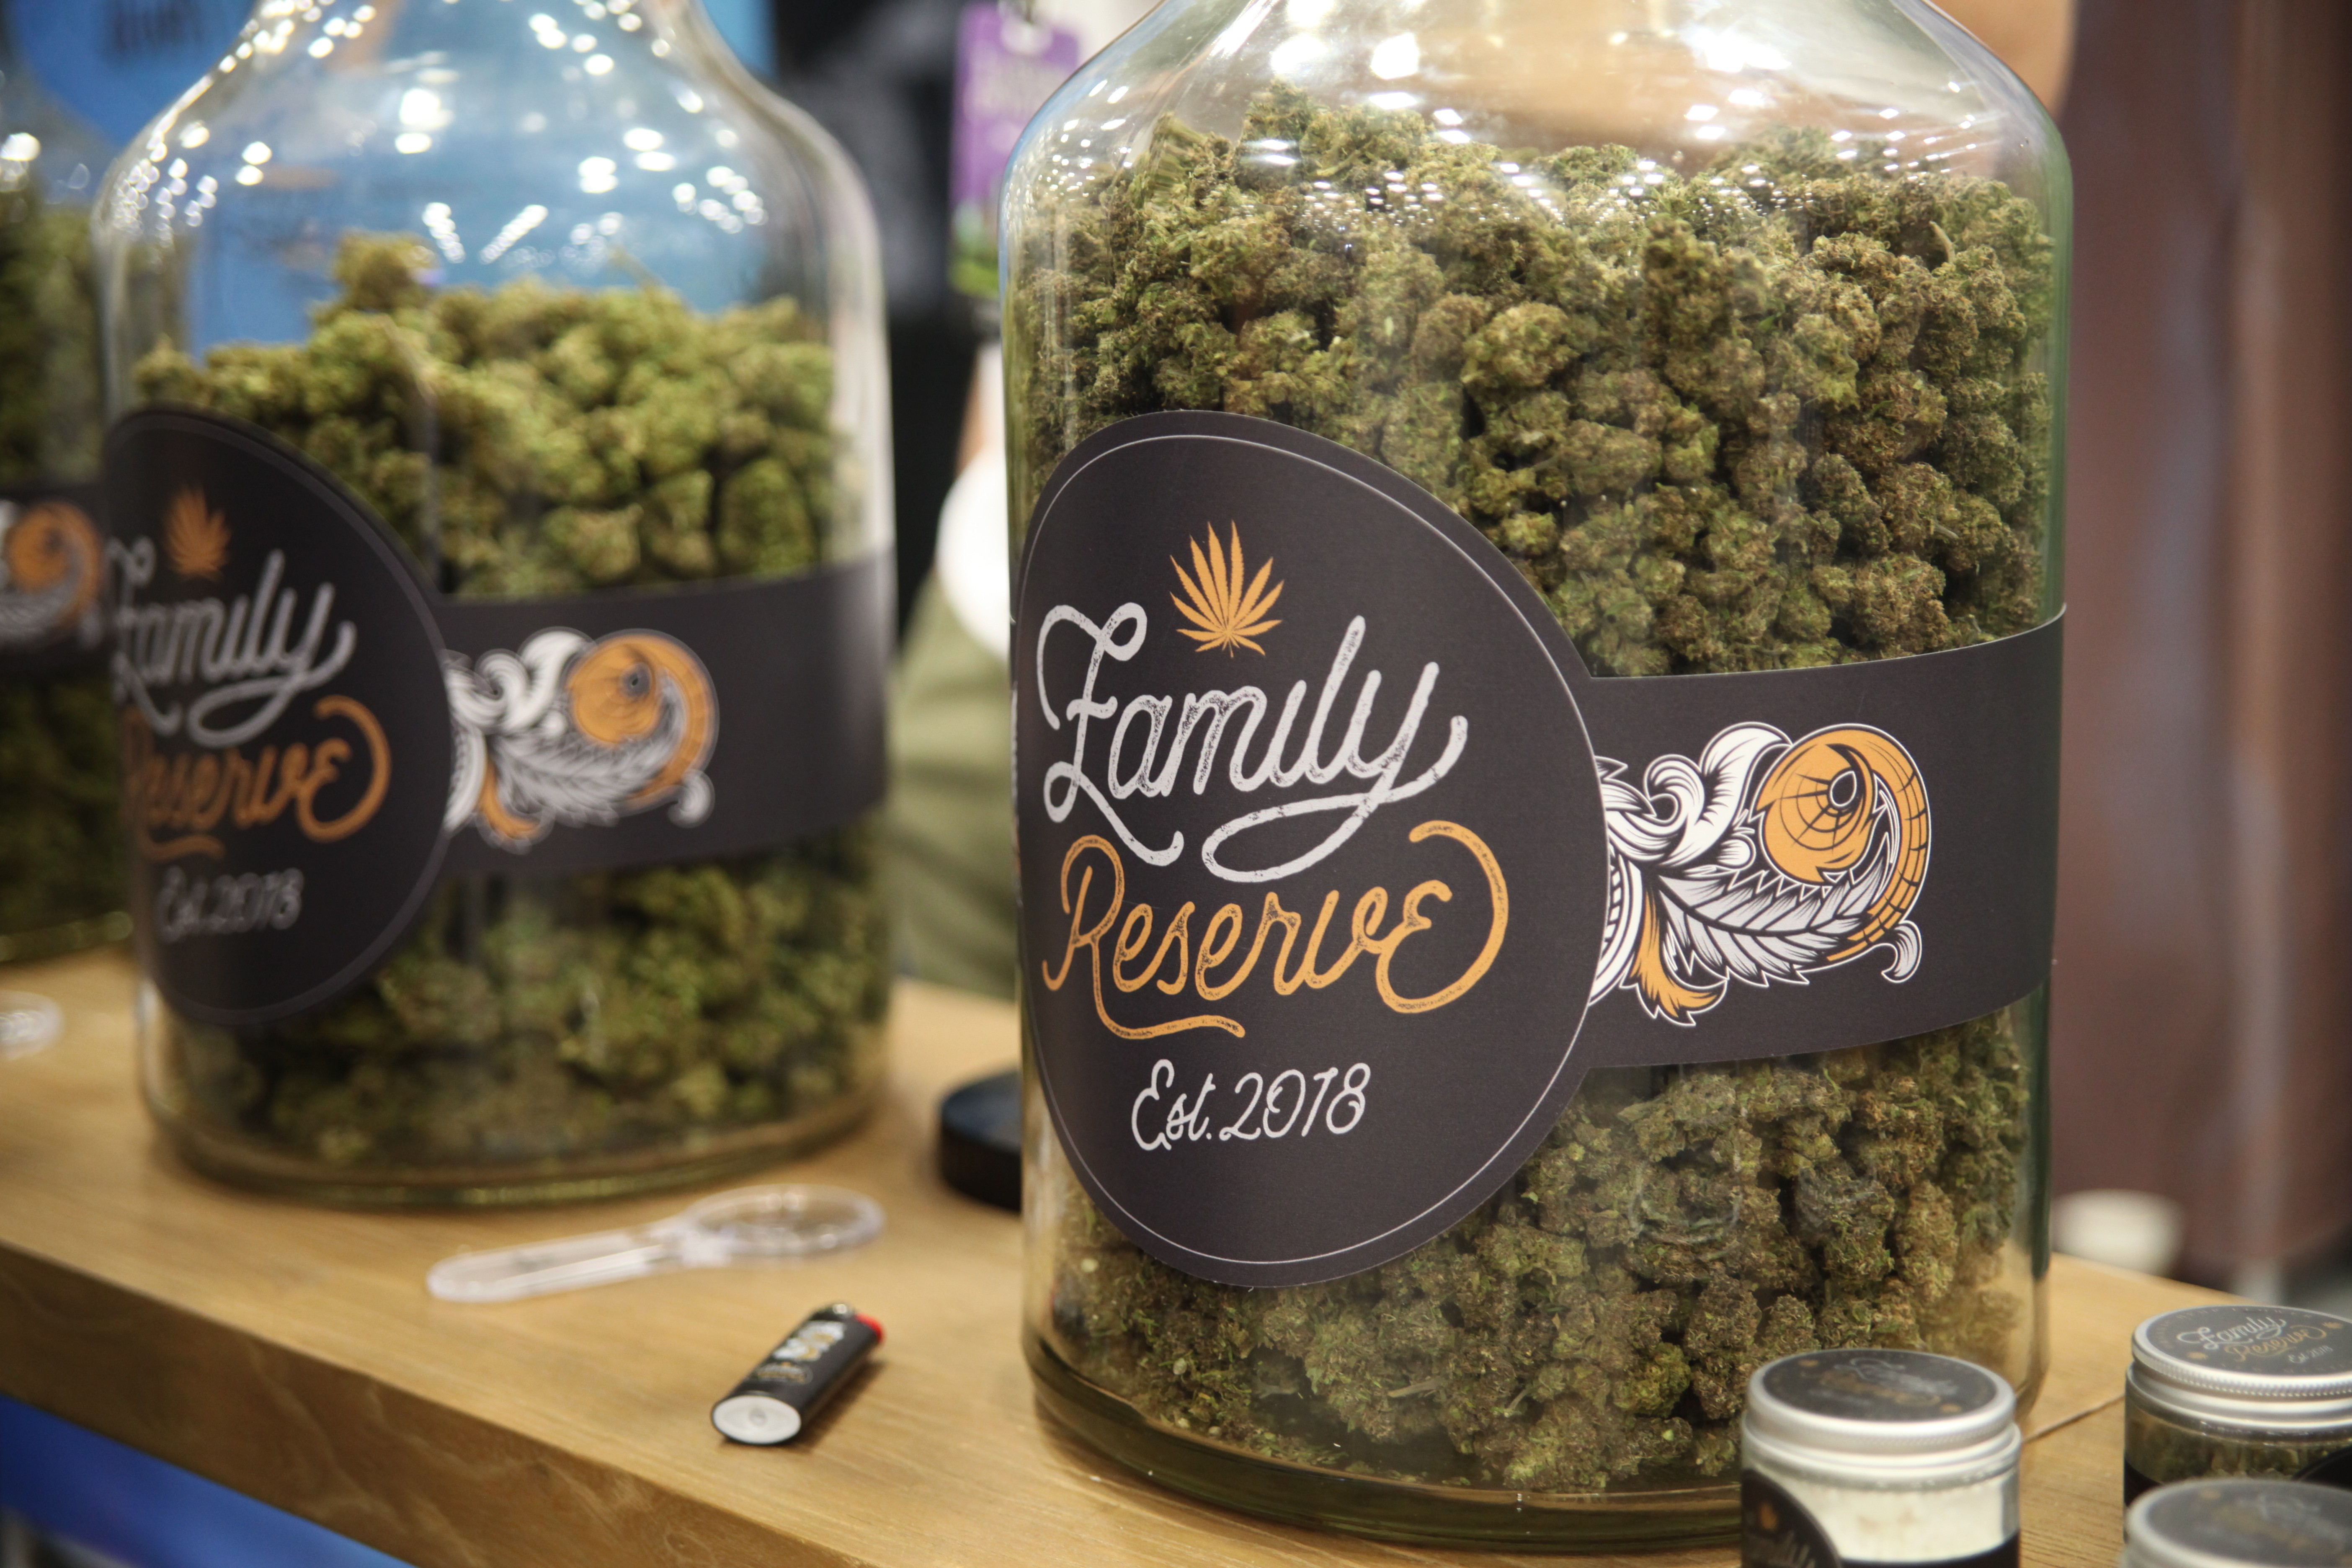 Smokable Hemp Can't Be Processed or Manufactured in Texas, State Supreme Court Rules